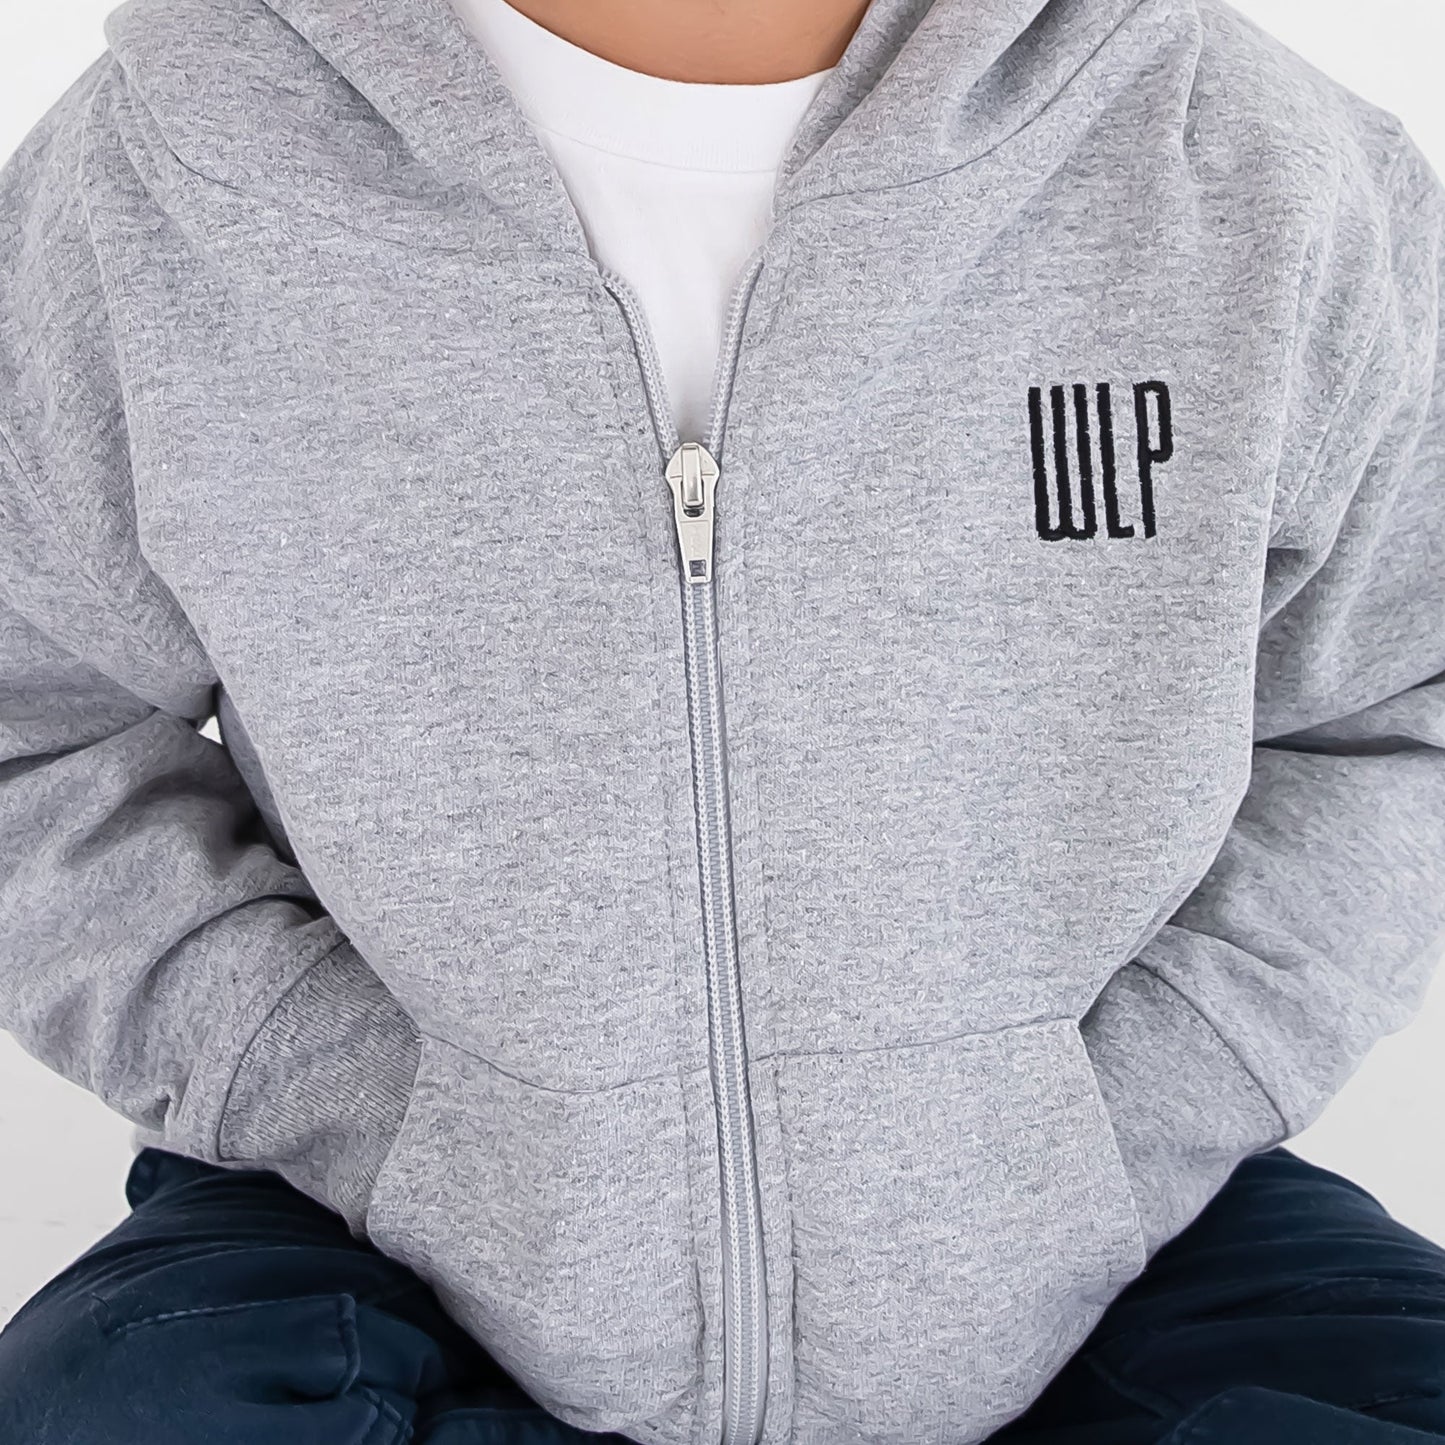 Detail photo of a toddler full zip jacket featuring a hood, silver full zip, pockets, and a personalized embroidered monogram in a navy thread on the left chest